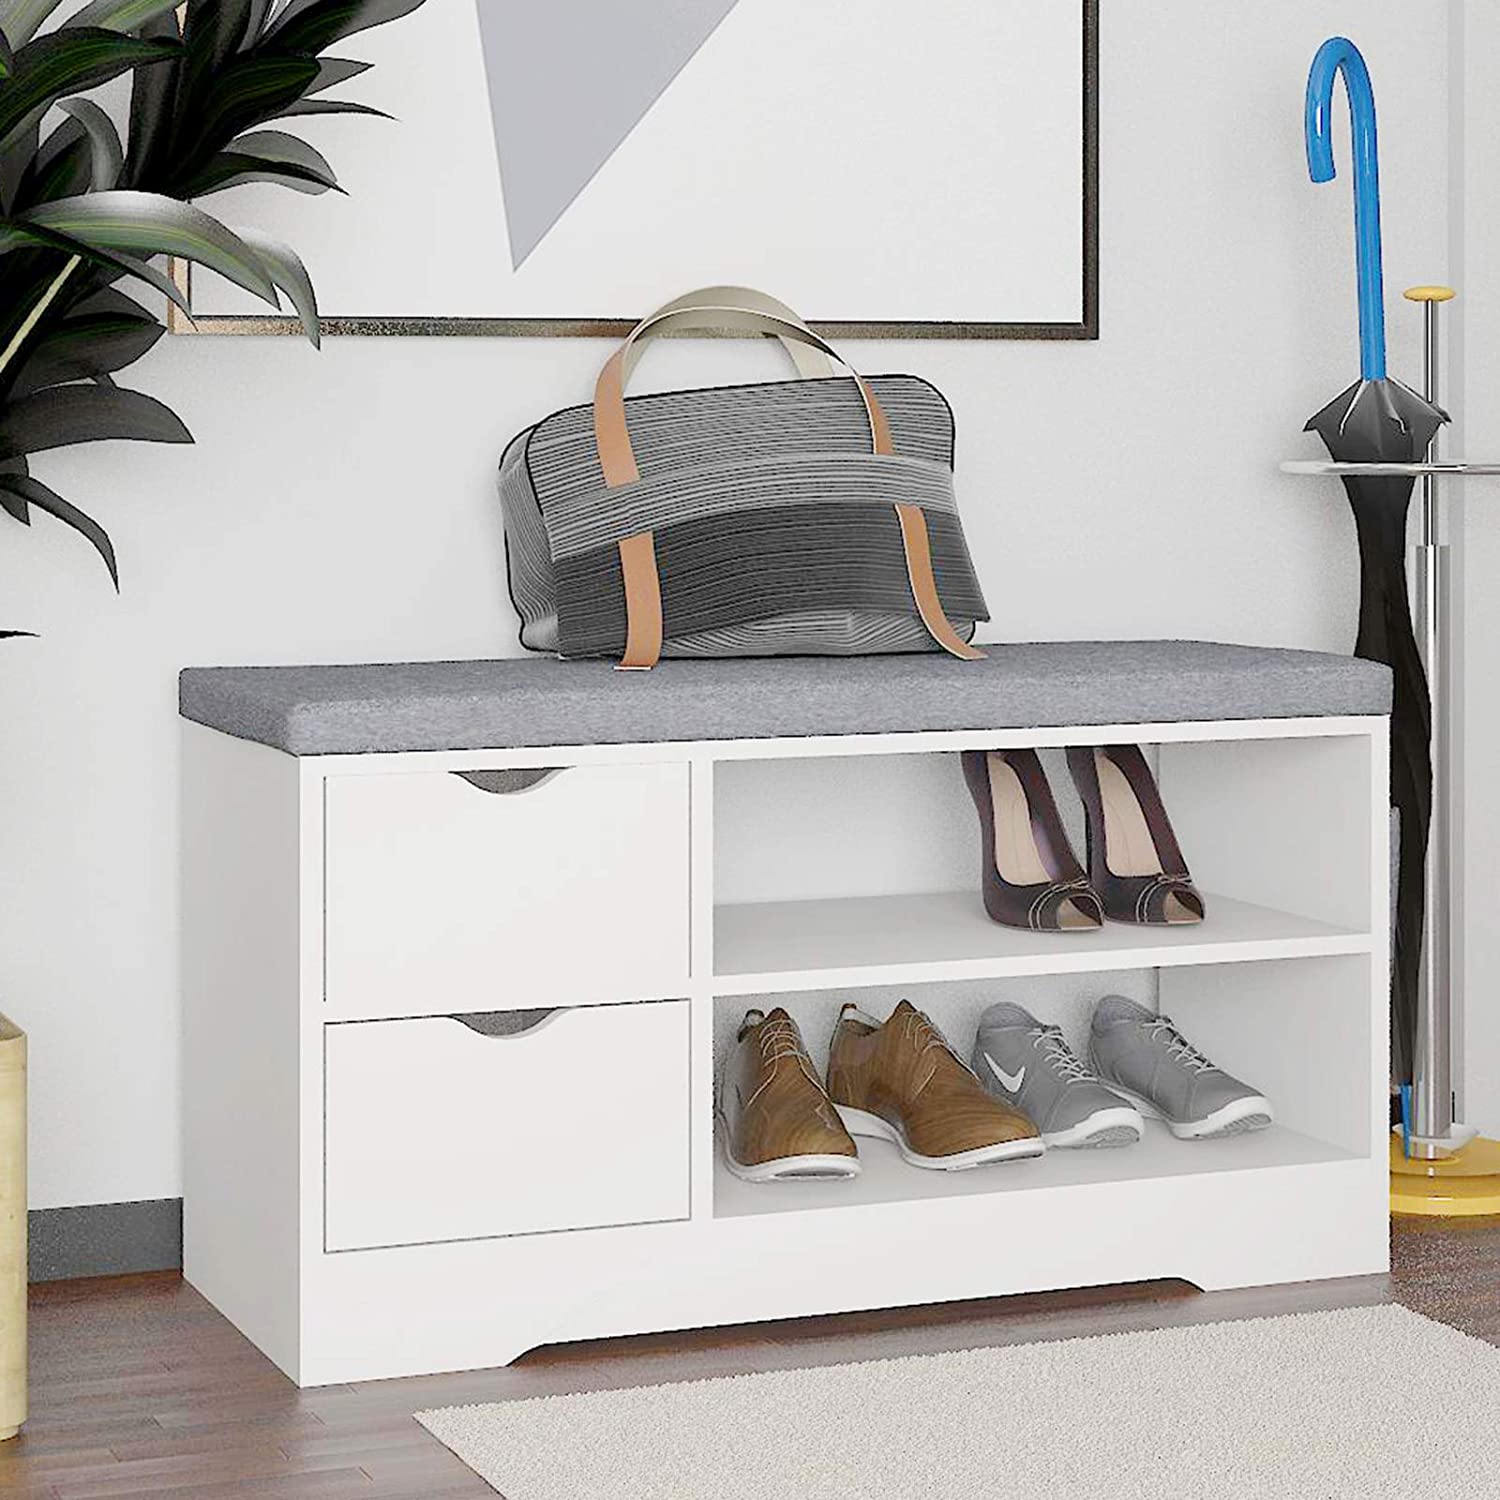 Shoe Storage Bench with Seating